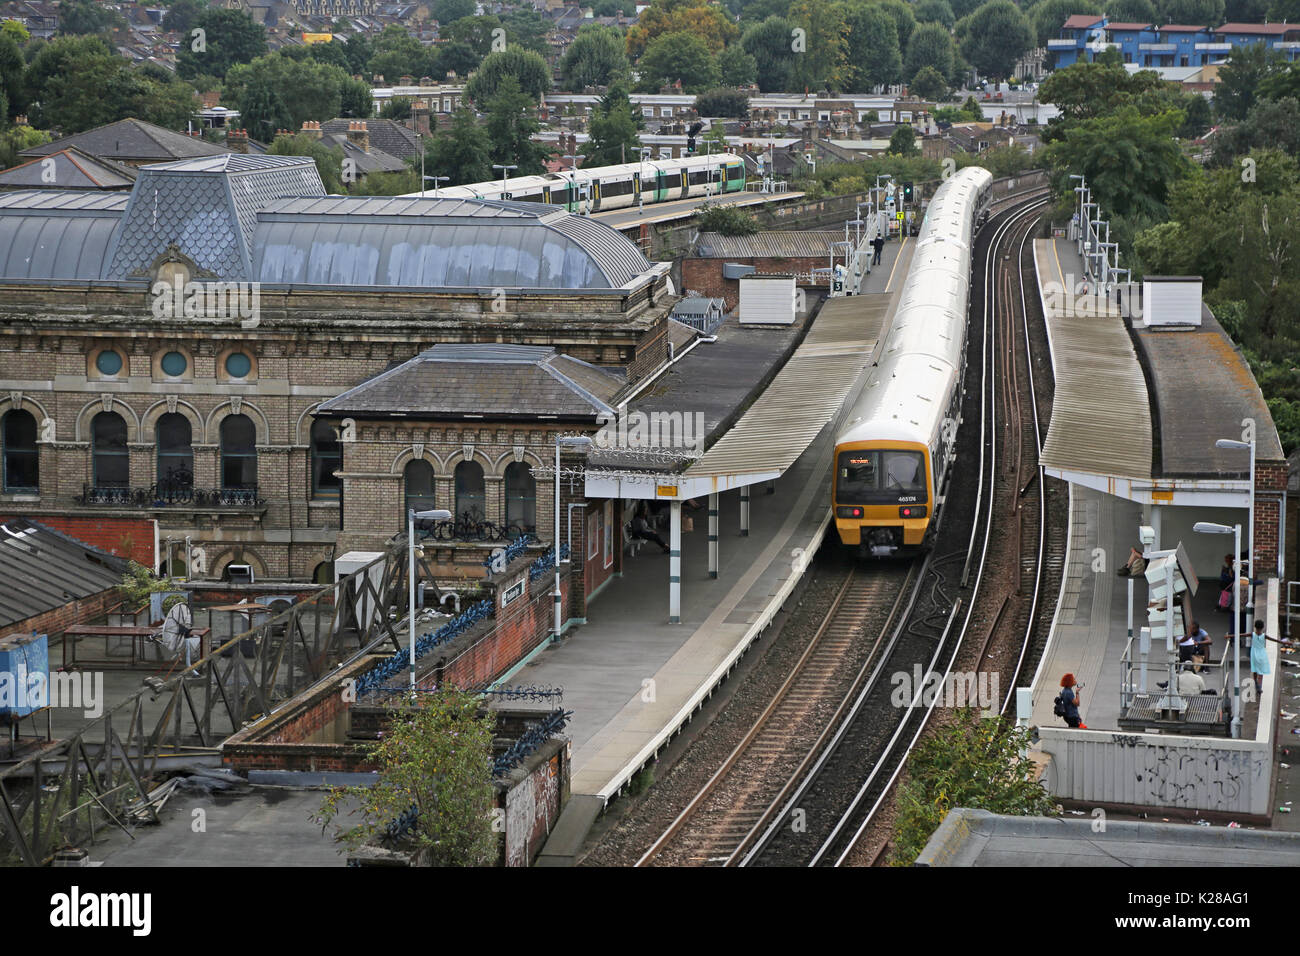 High level view of Peckham Rye Station in Southeast London, UK. Shows Southeastern network train at Platform 3 and the Victorian station building. Stock Photo